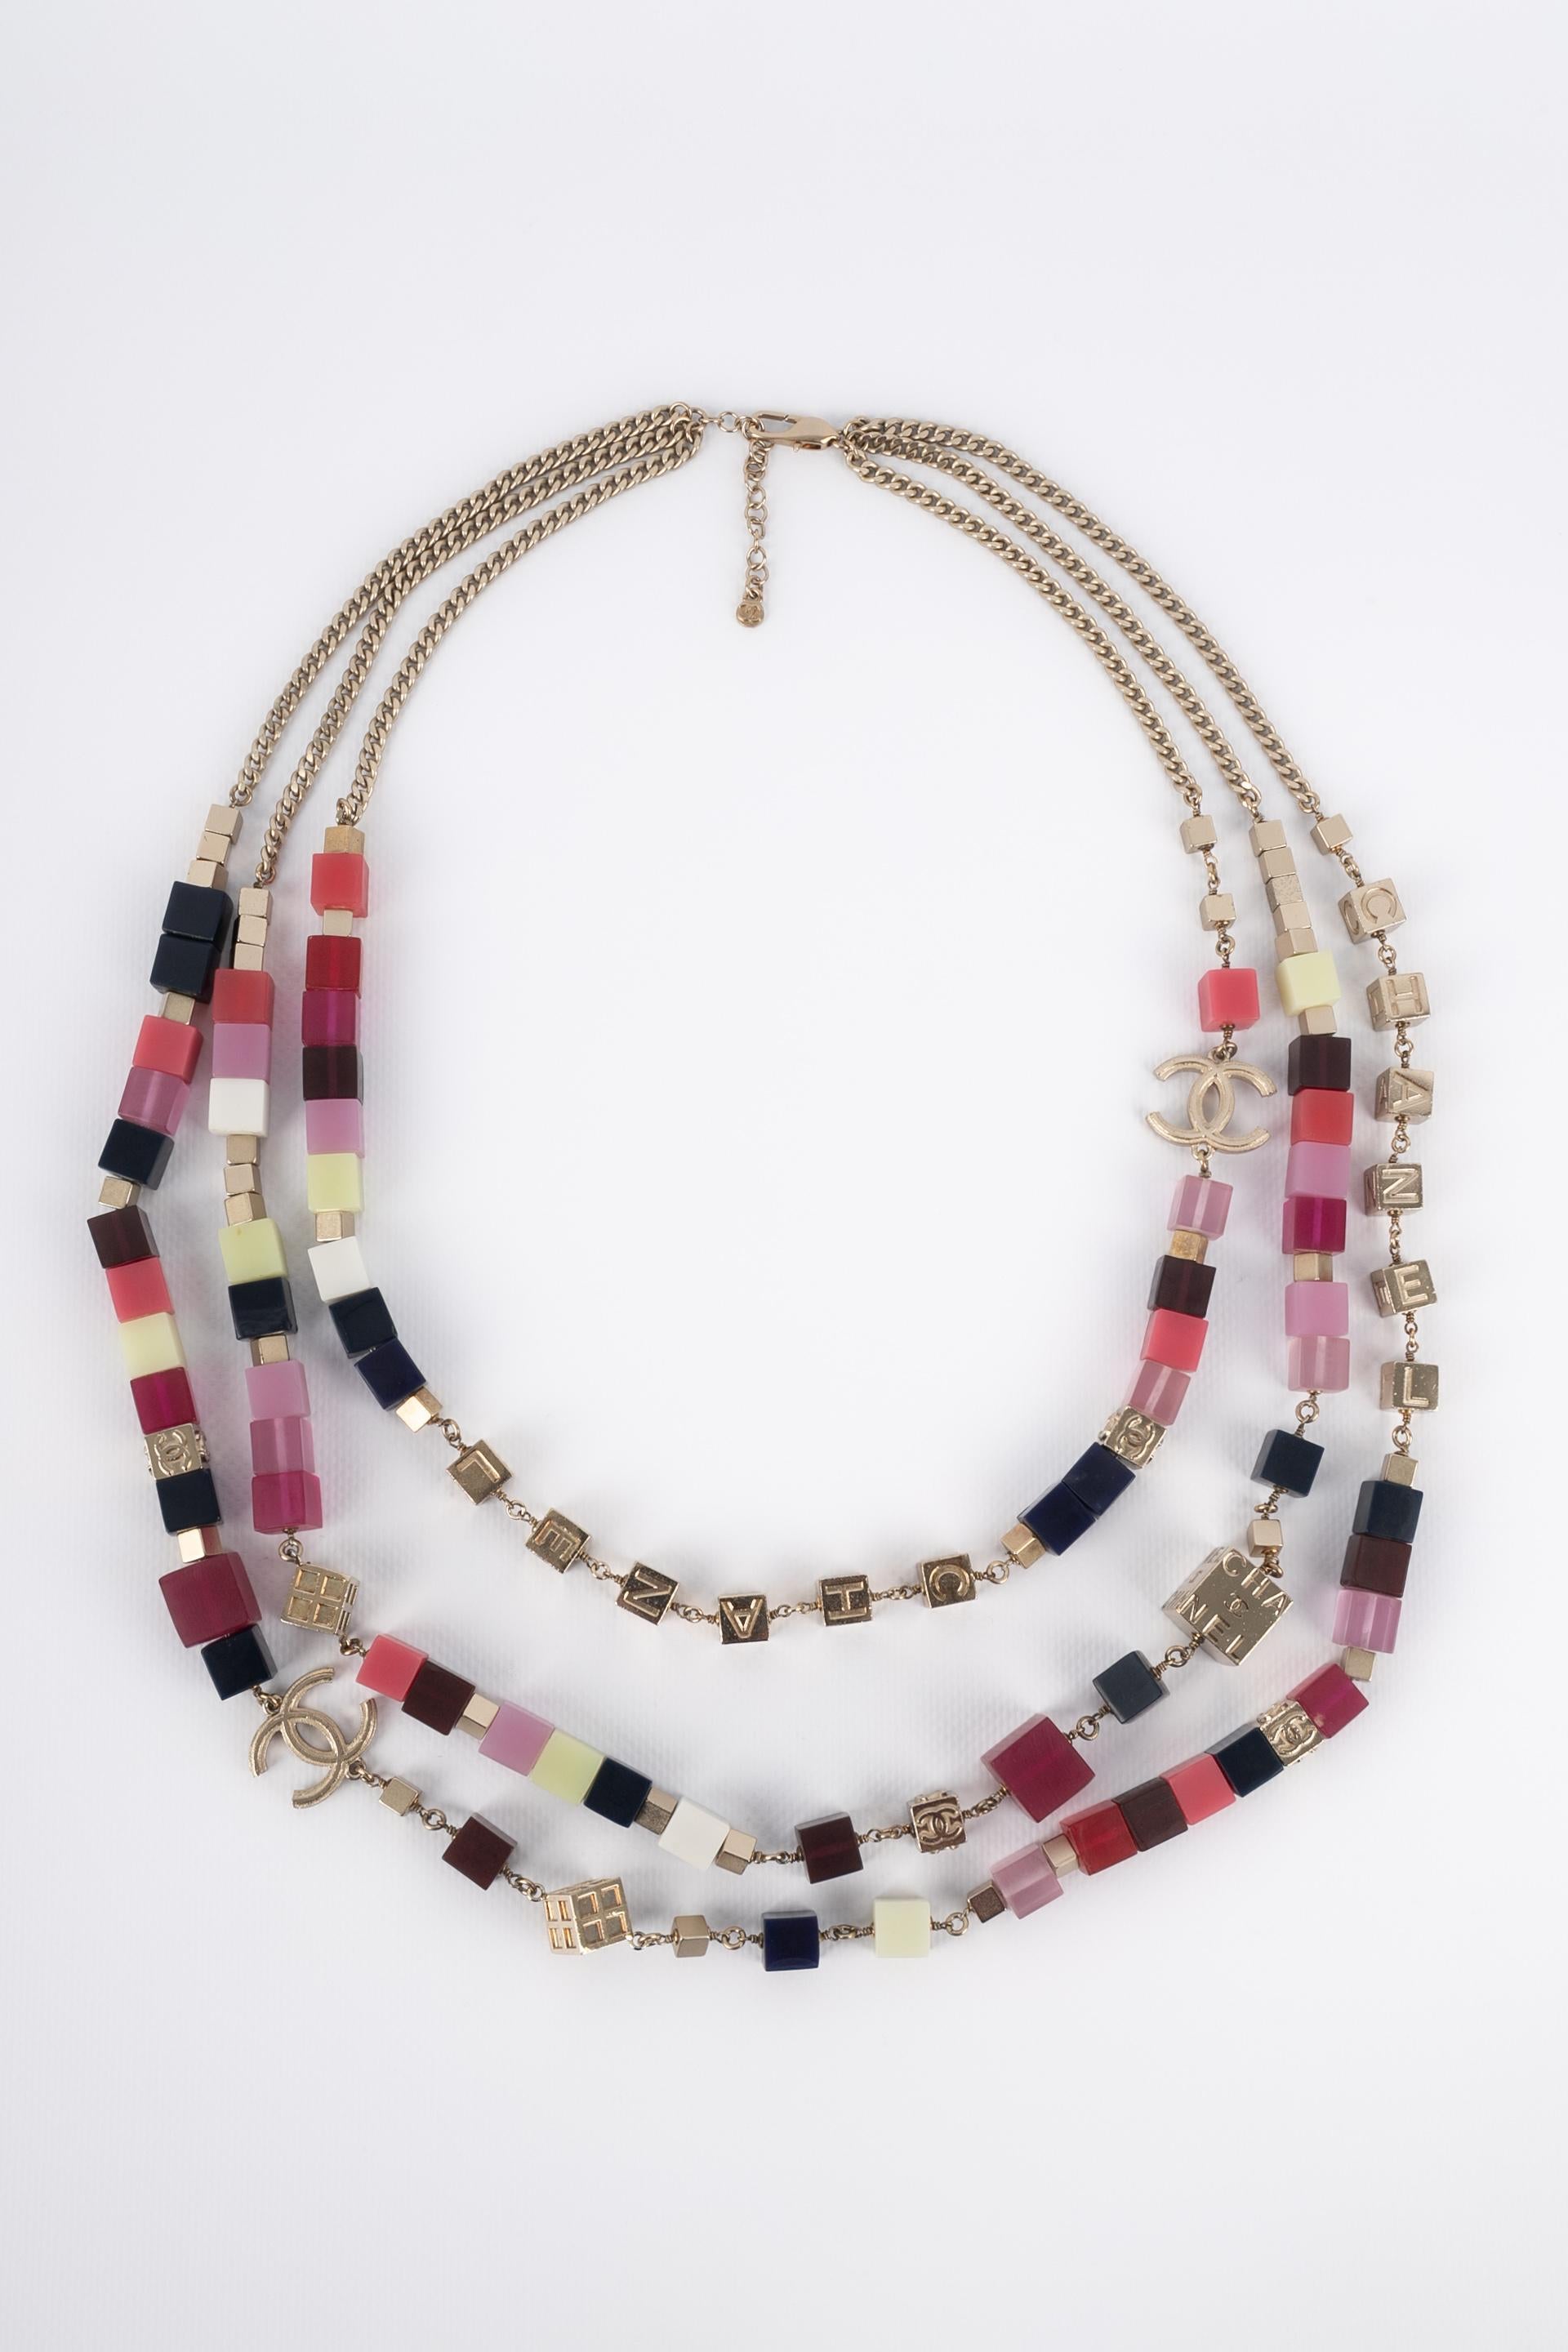 CHANEL - (Made in France) Silvery metal three-row necklace with colored resin cubes. 2004 Spring-Summer Collection under the artistic direction of Karl Lagerfeld.

Condition:
Very good condition

Dimensions:
Length of the shorter row: from 68 cm to